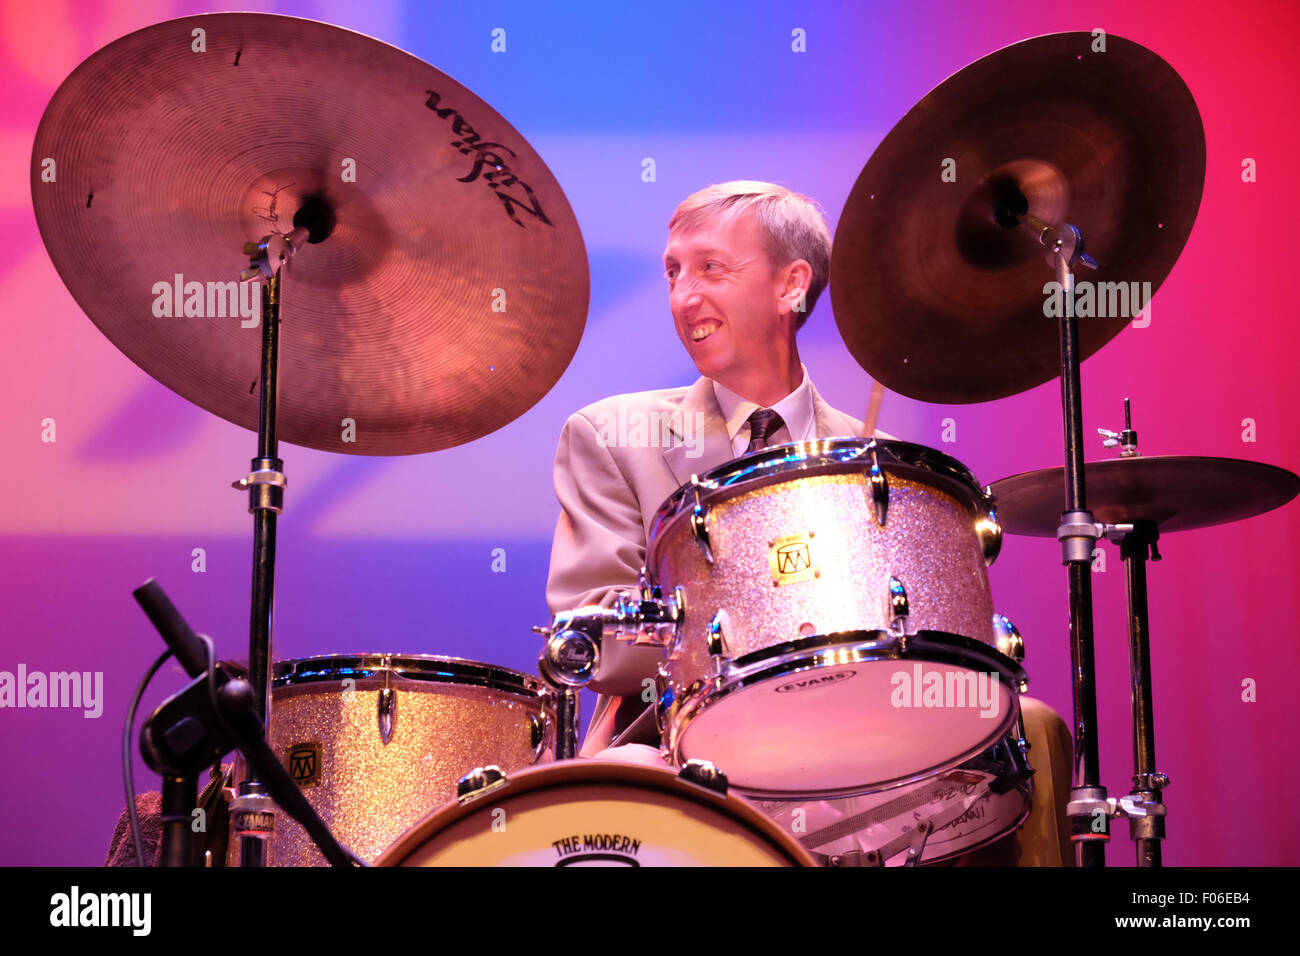 Brecon, Powys, Wales, UK. 8th August, 2015. Brecon Jazz 2015 the Scott Hamilton Quartet performing at the Brycheiniog Theatre. Photo shows Steve Brown on drums. Stock Photo